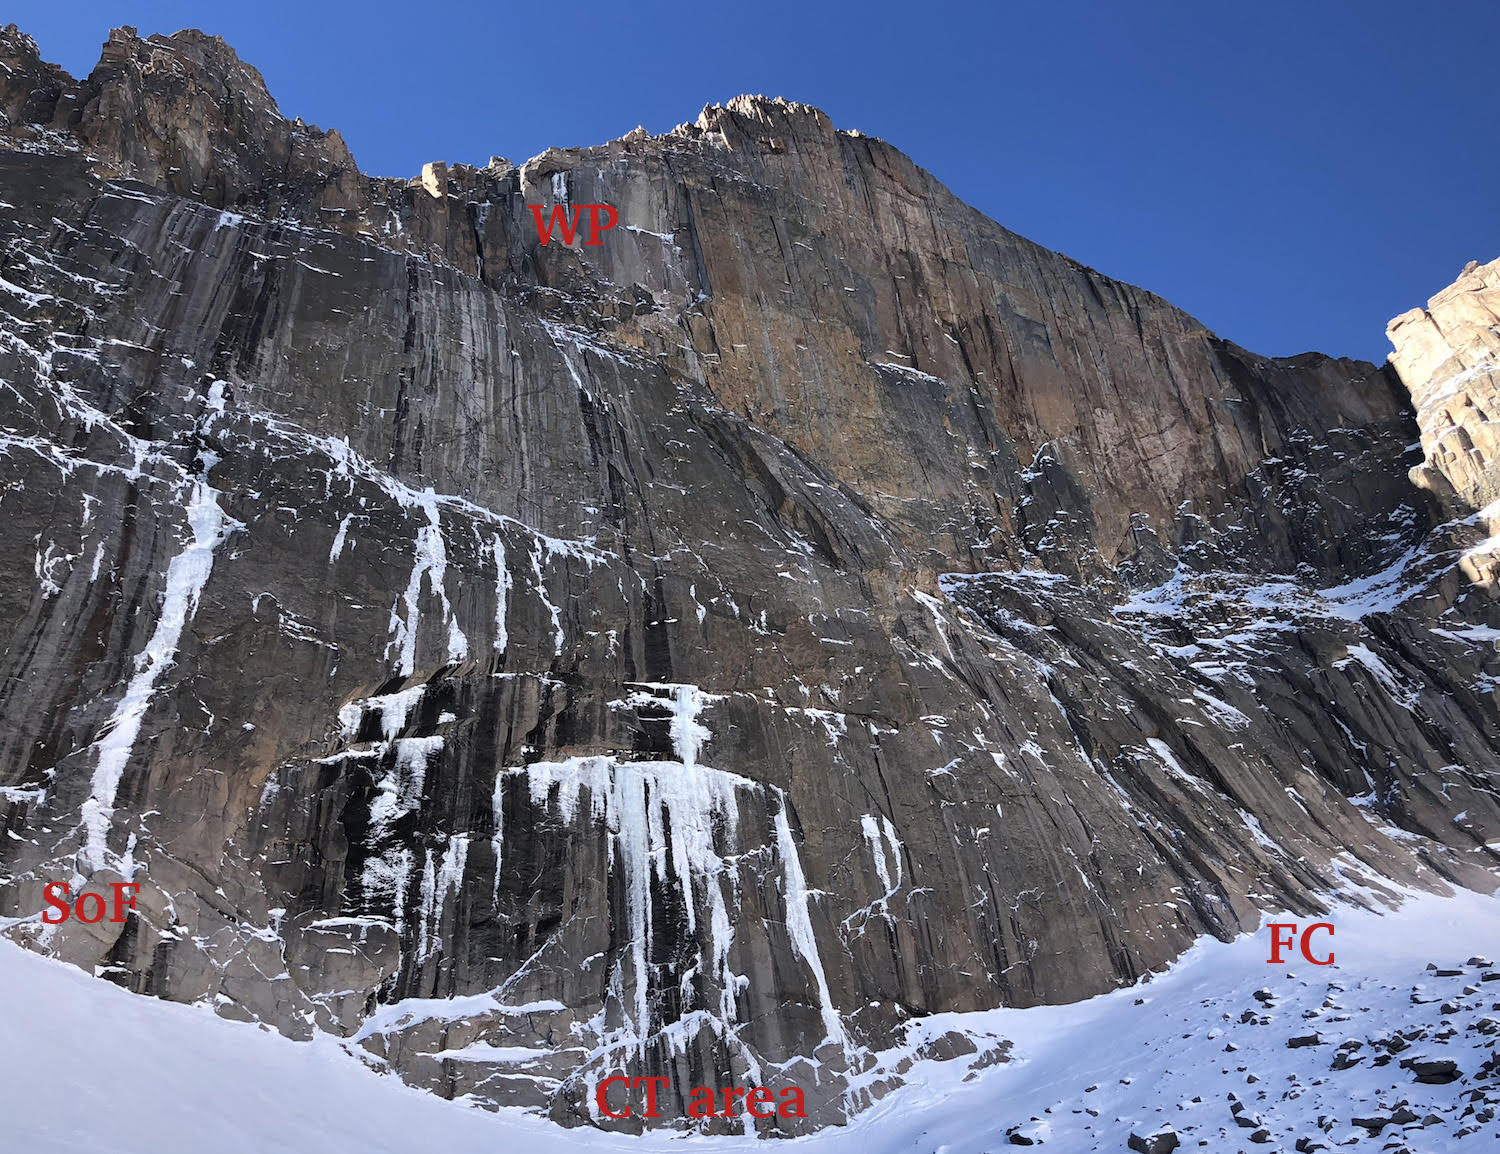 An overview of the ice/mixed routes on the east face of Longs Peak in October 2018: Smear of Fear is labeled on the lower left; the Crazy Train area is at the bottom center (see detailed photo below); Field's Chimney is on the right; Window Pain is top center. [Photo] Brian McMahon